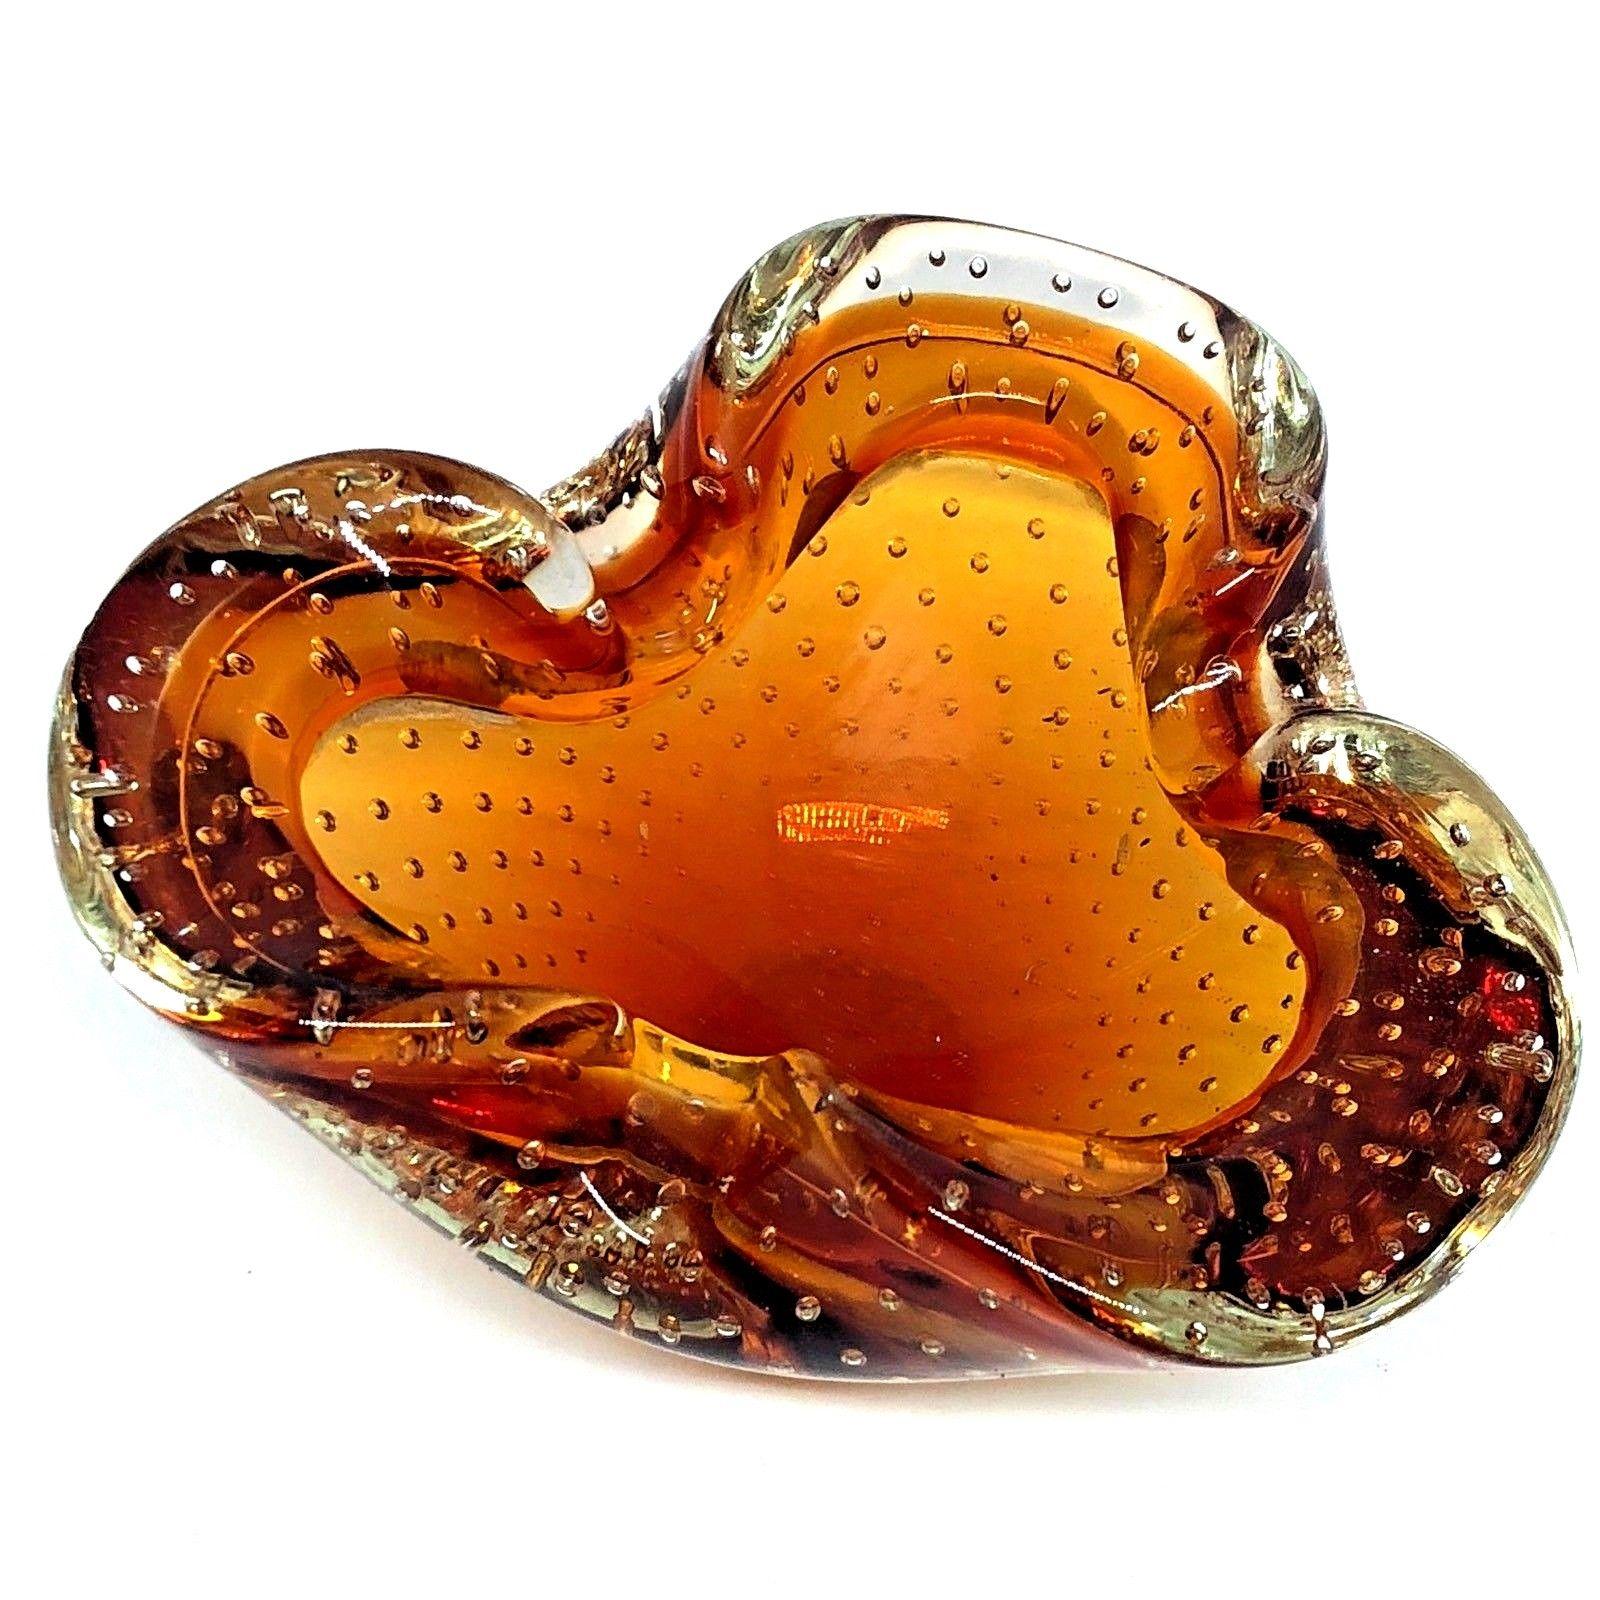 Gorgeous handblown Murano art glass piece with Sommerso and bullicante techniques. A beautiful organic shaped bowl or ashtray in amber glass cased into clear glass and full of blown controlled bubbles, Italy, 1960s.